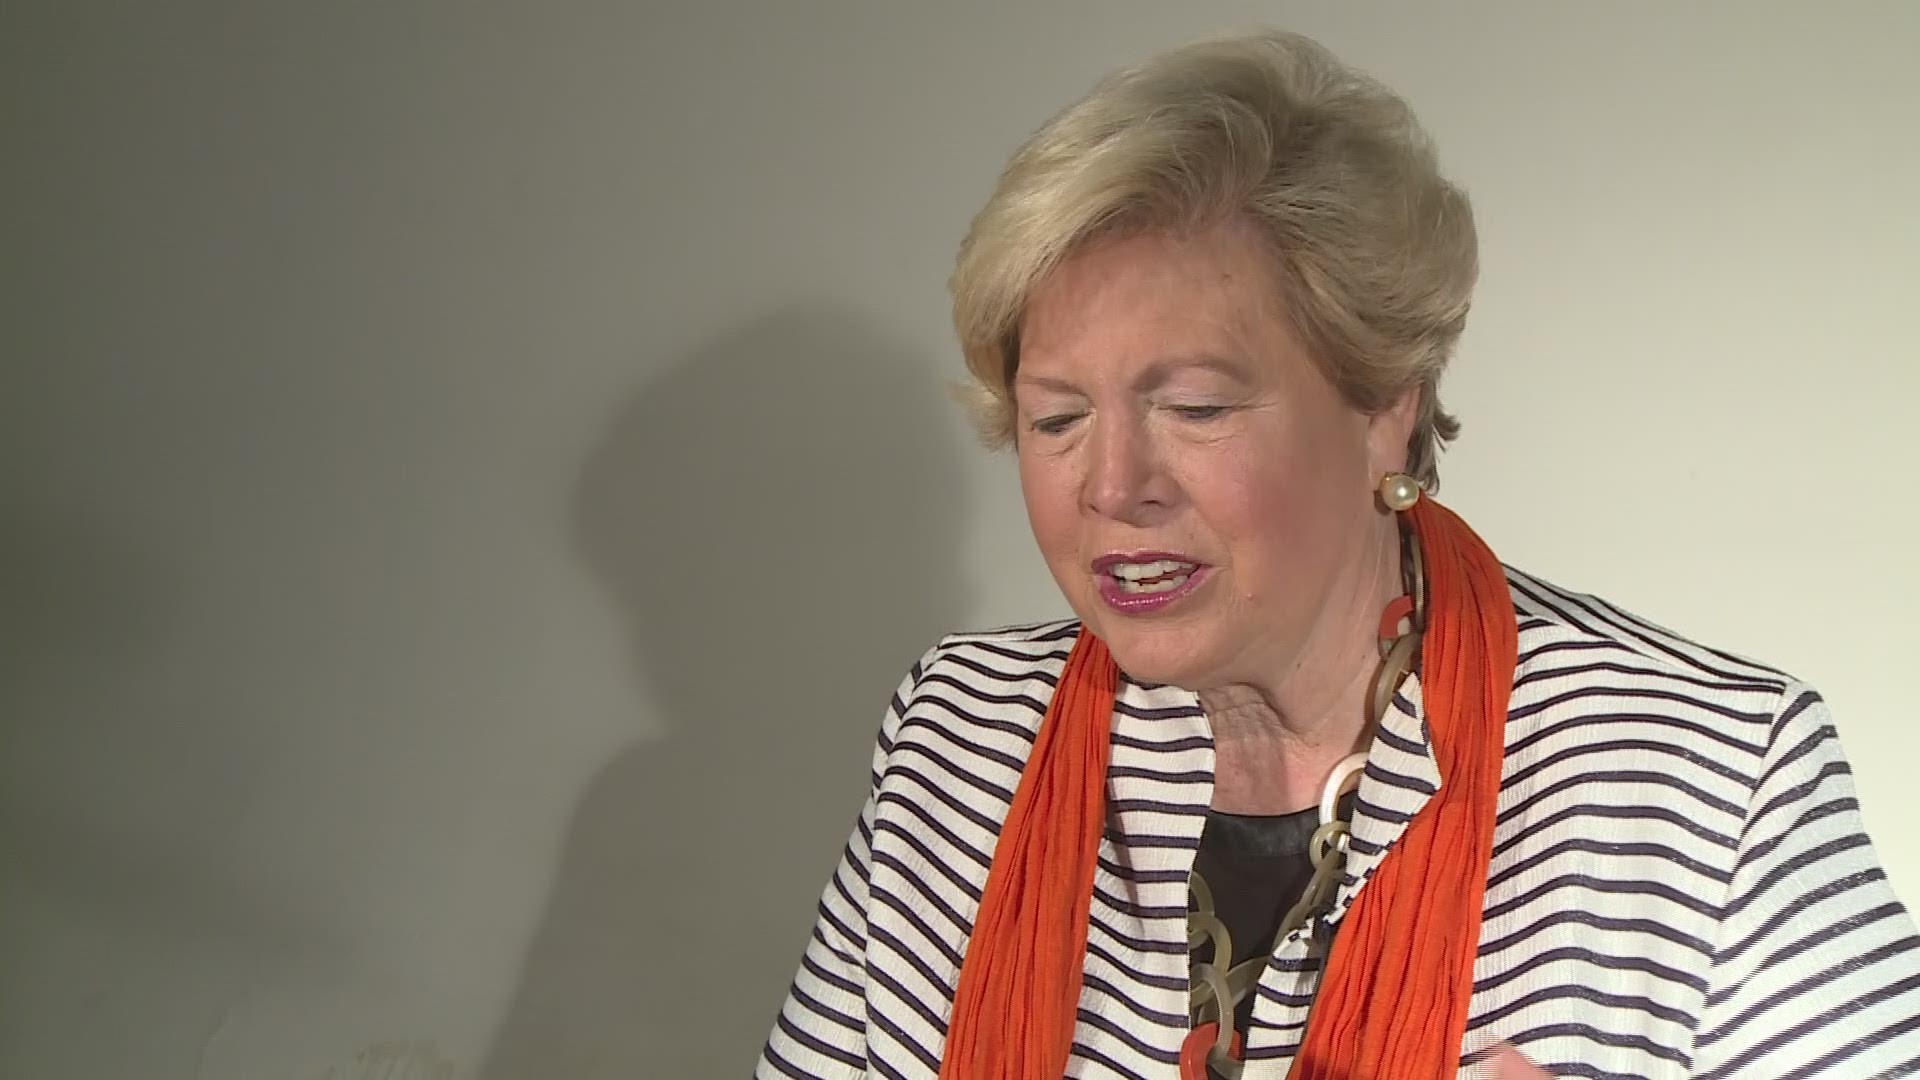 Lady Vols Athletic Director Emeritus Joan Cronan and 1987 national champion Shelley Sexton Collier tell us what they miss most about Pat Summitt and the lessons she taught that they carry with them.